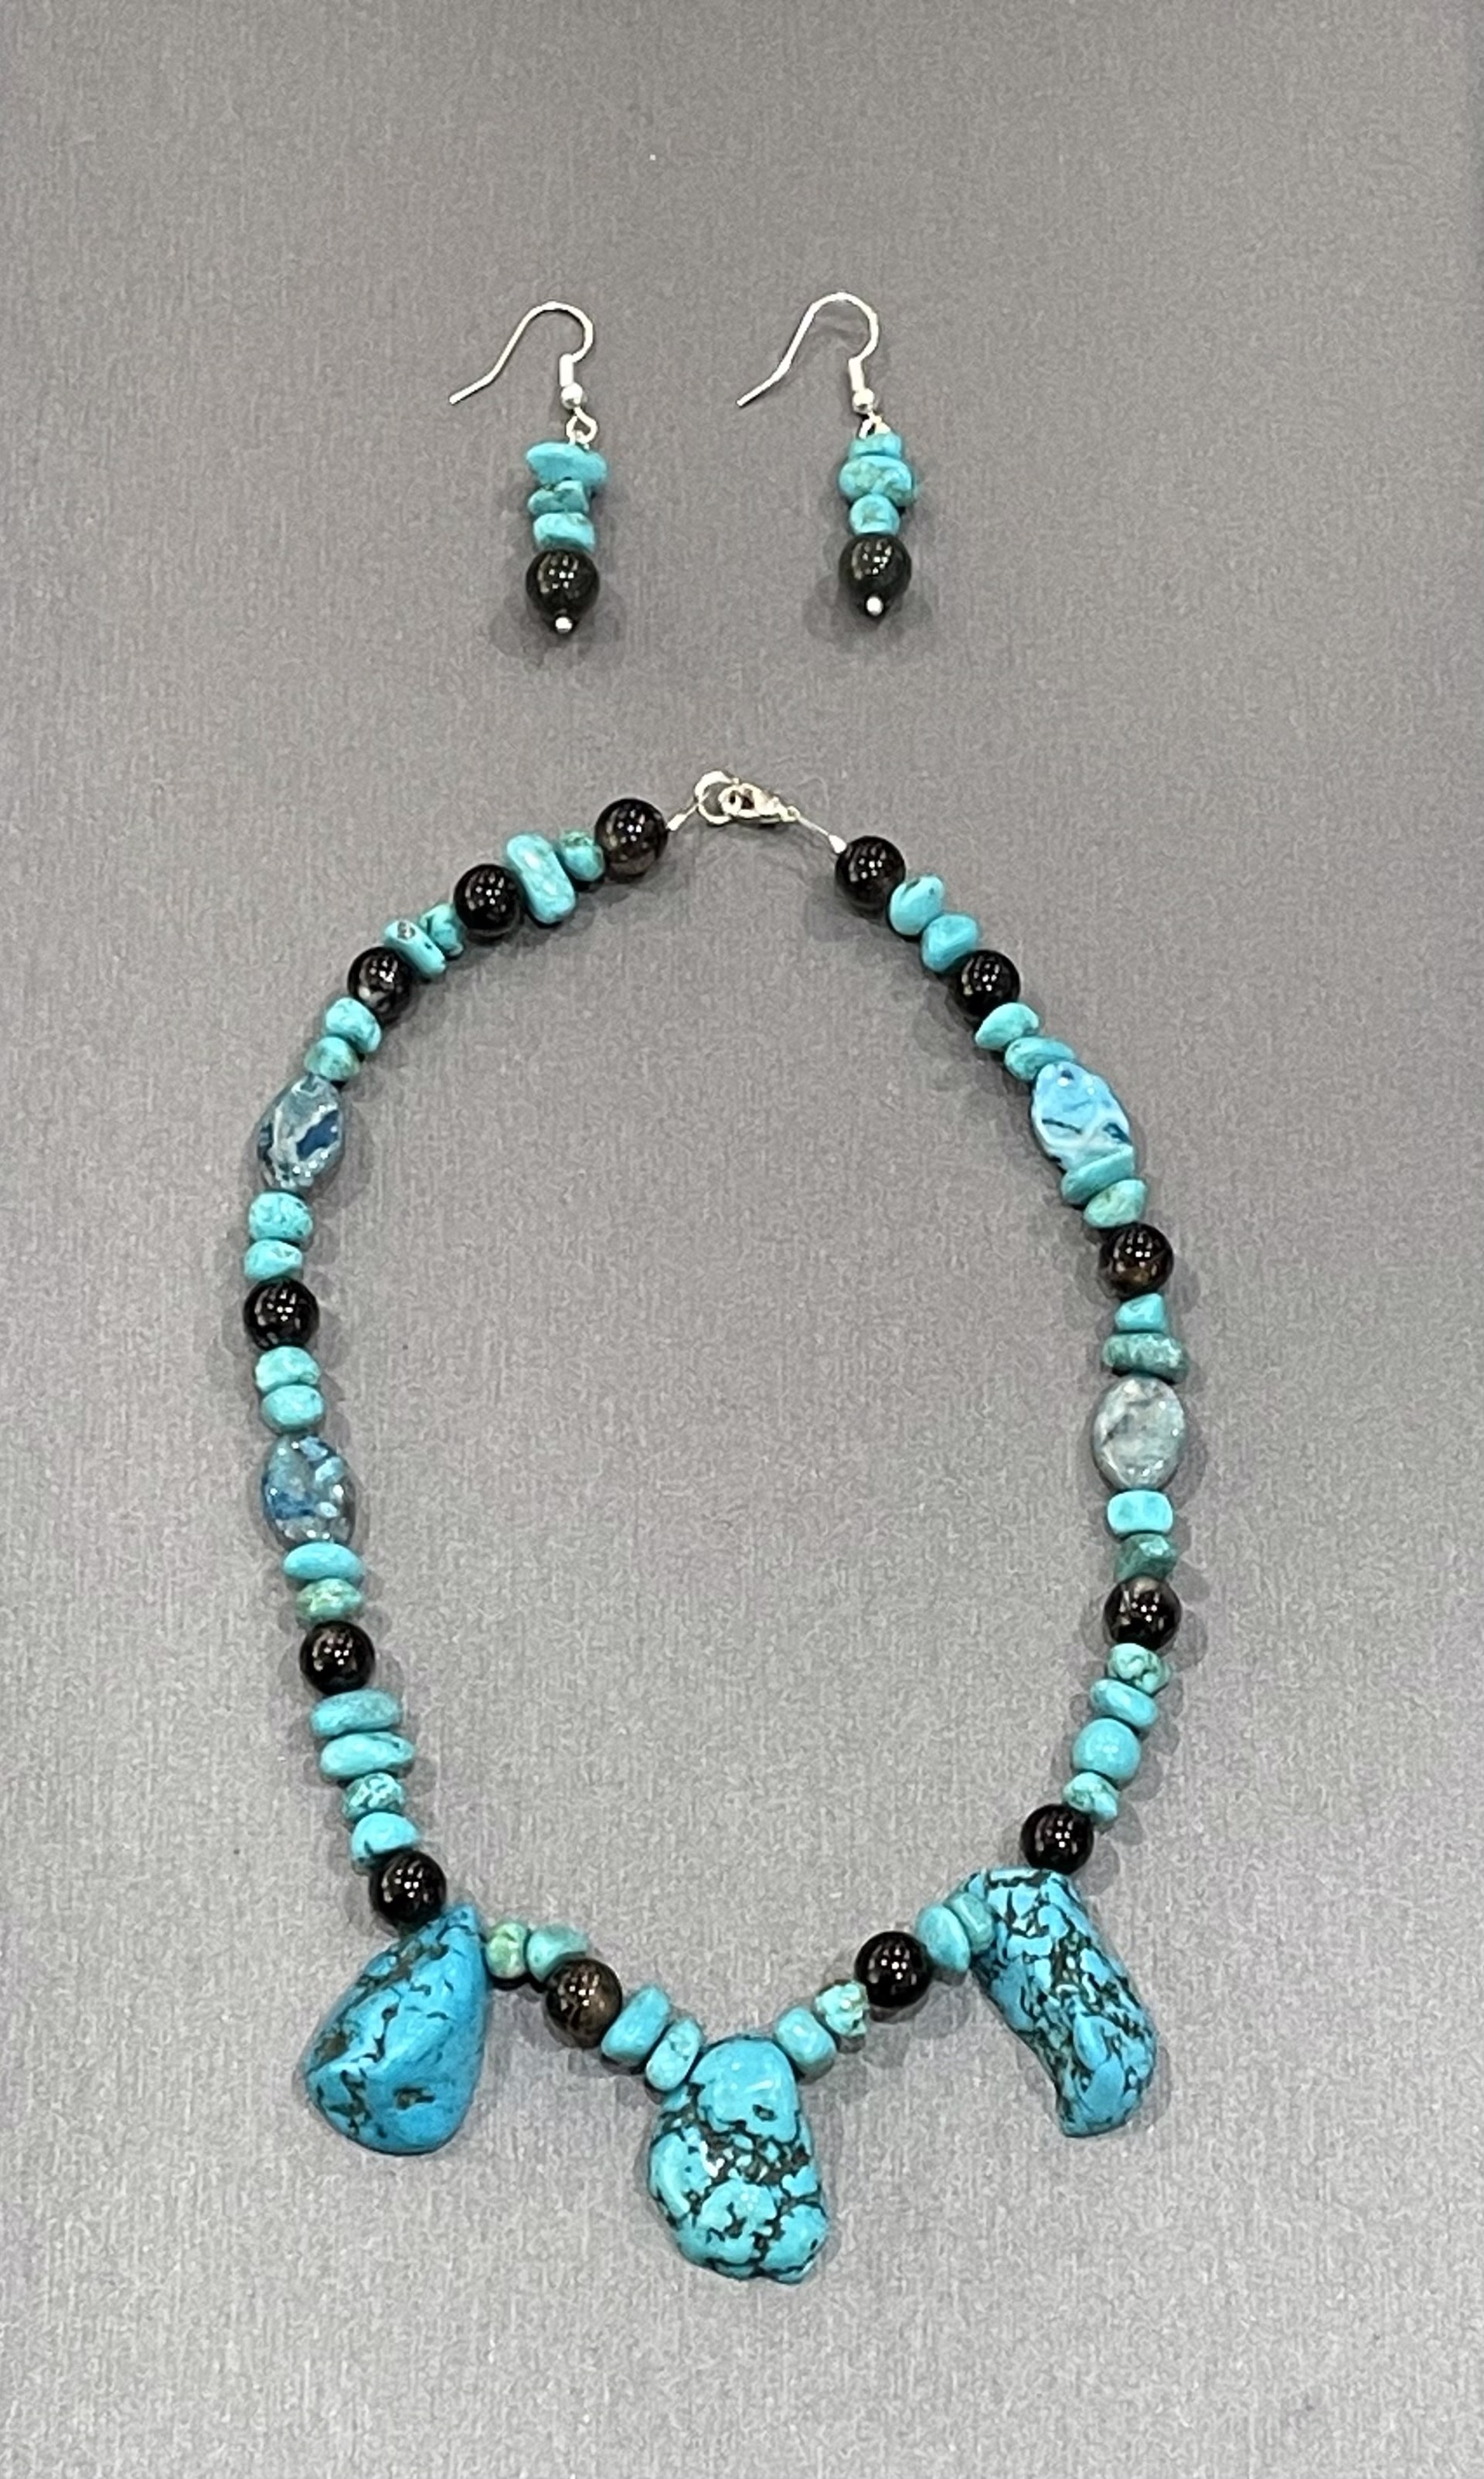 Turquoise Necklace and Earrings by Patrice Box